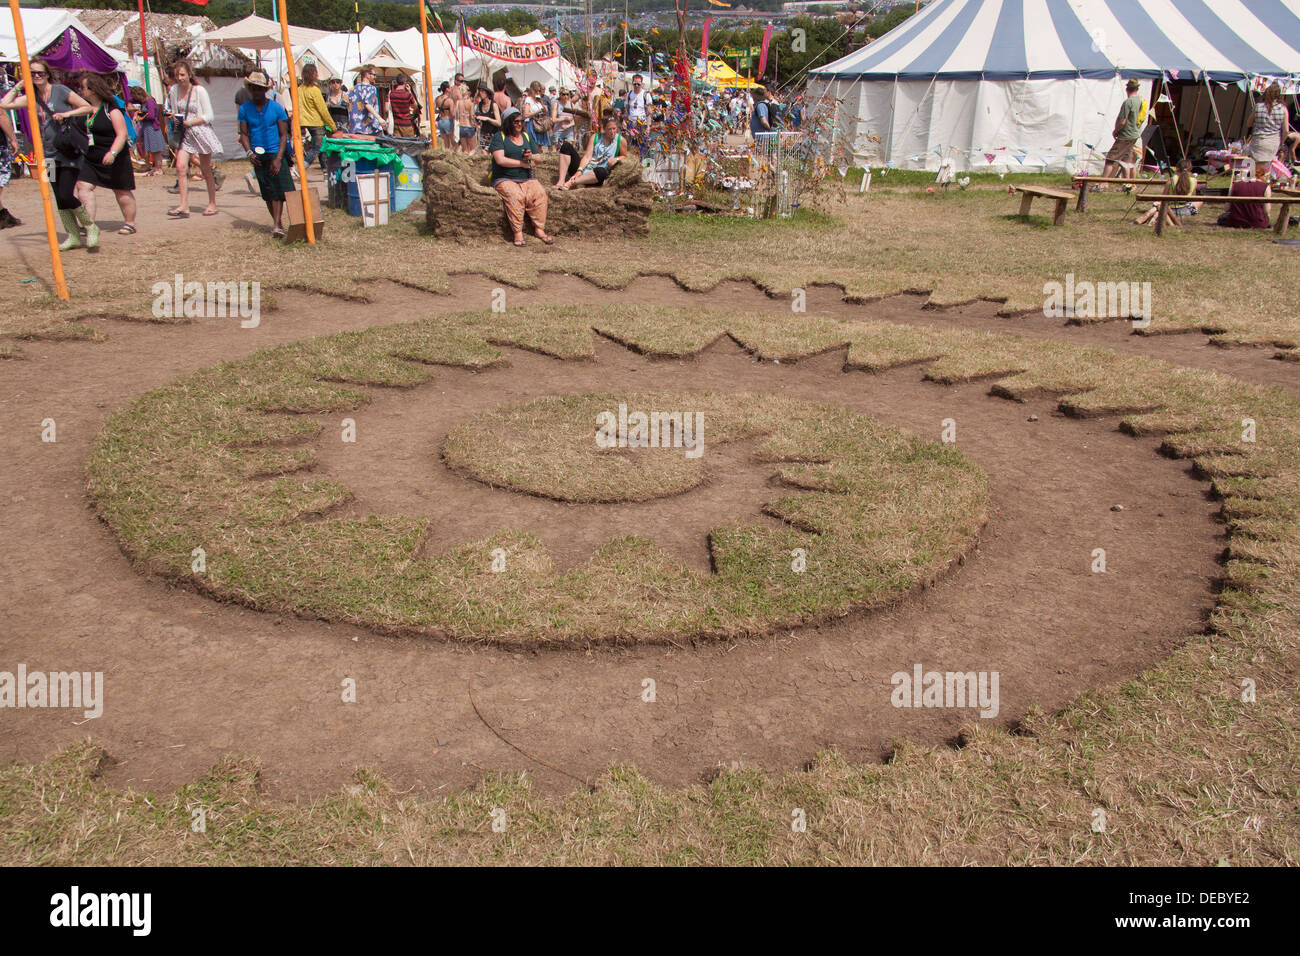 Spiral pattern cut of of the grass turf, Greenfield's, Glastonbury Festival, Somerset, England. Stock Photo